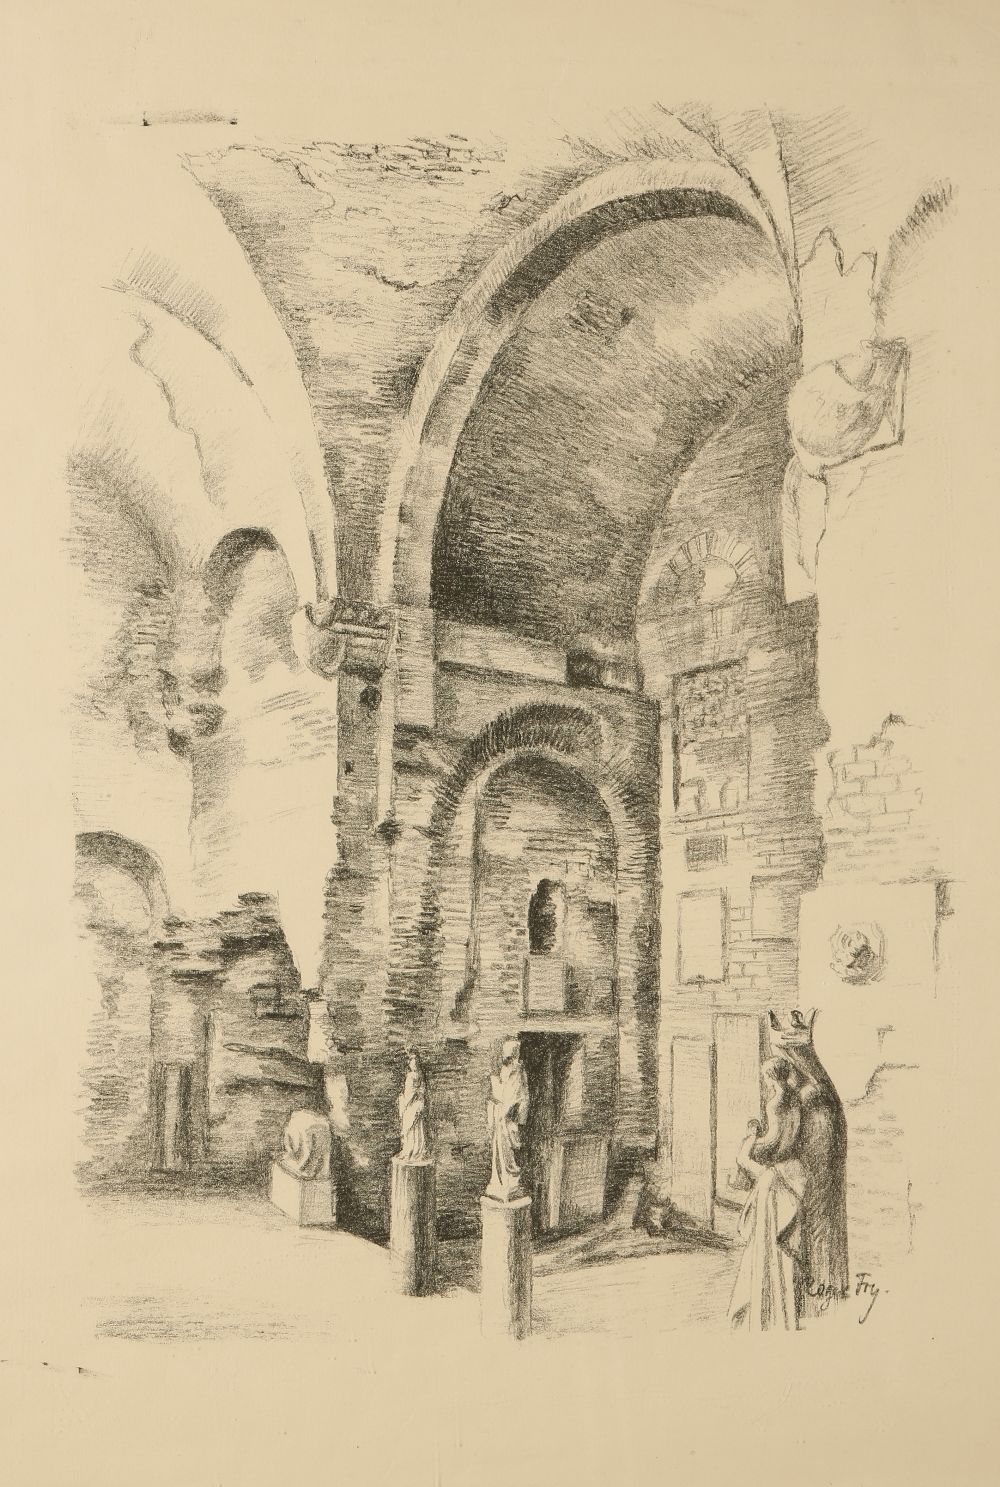 AFTER ROGER FRY (1866-1934) "The South Transept of the Abbey Church of Cluny" or "Roman Temple",